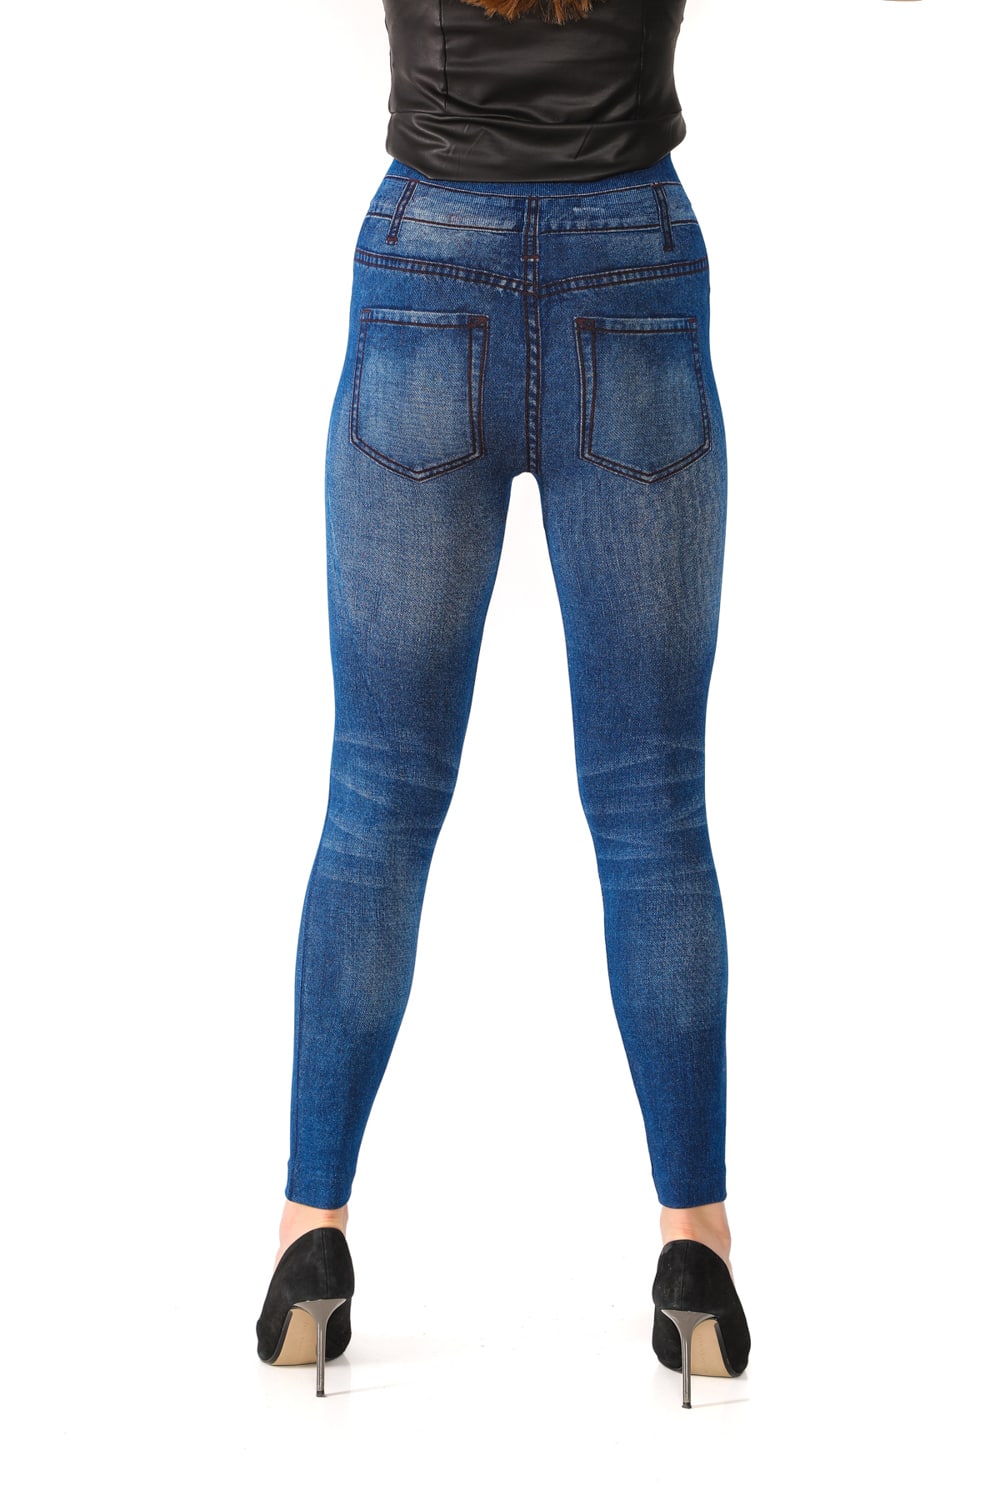 Denim Leggings with Fake Pockets and Buttons Pattern - Its All